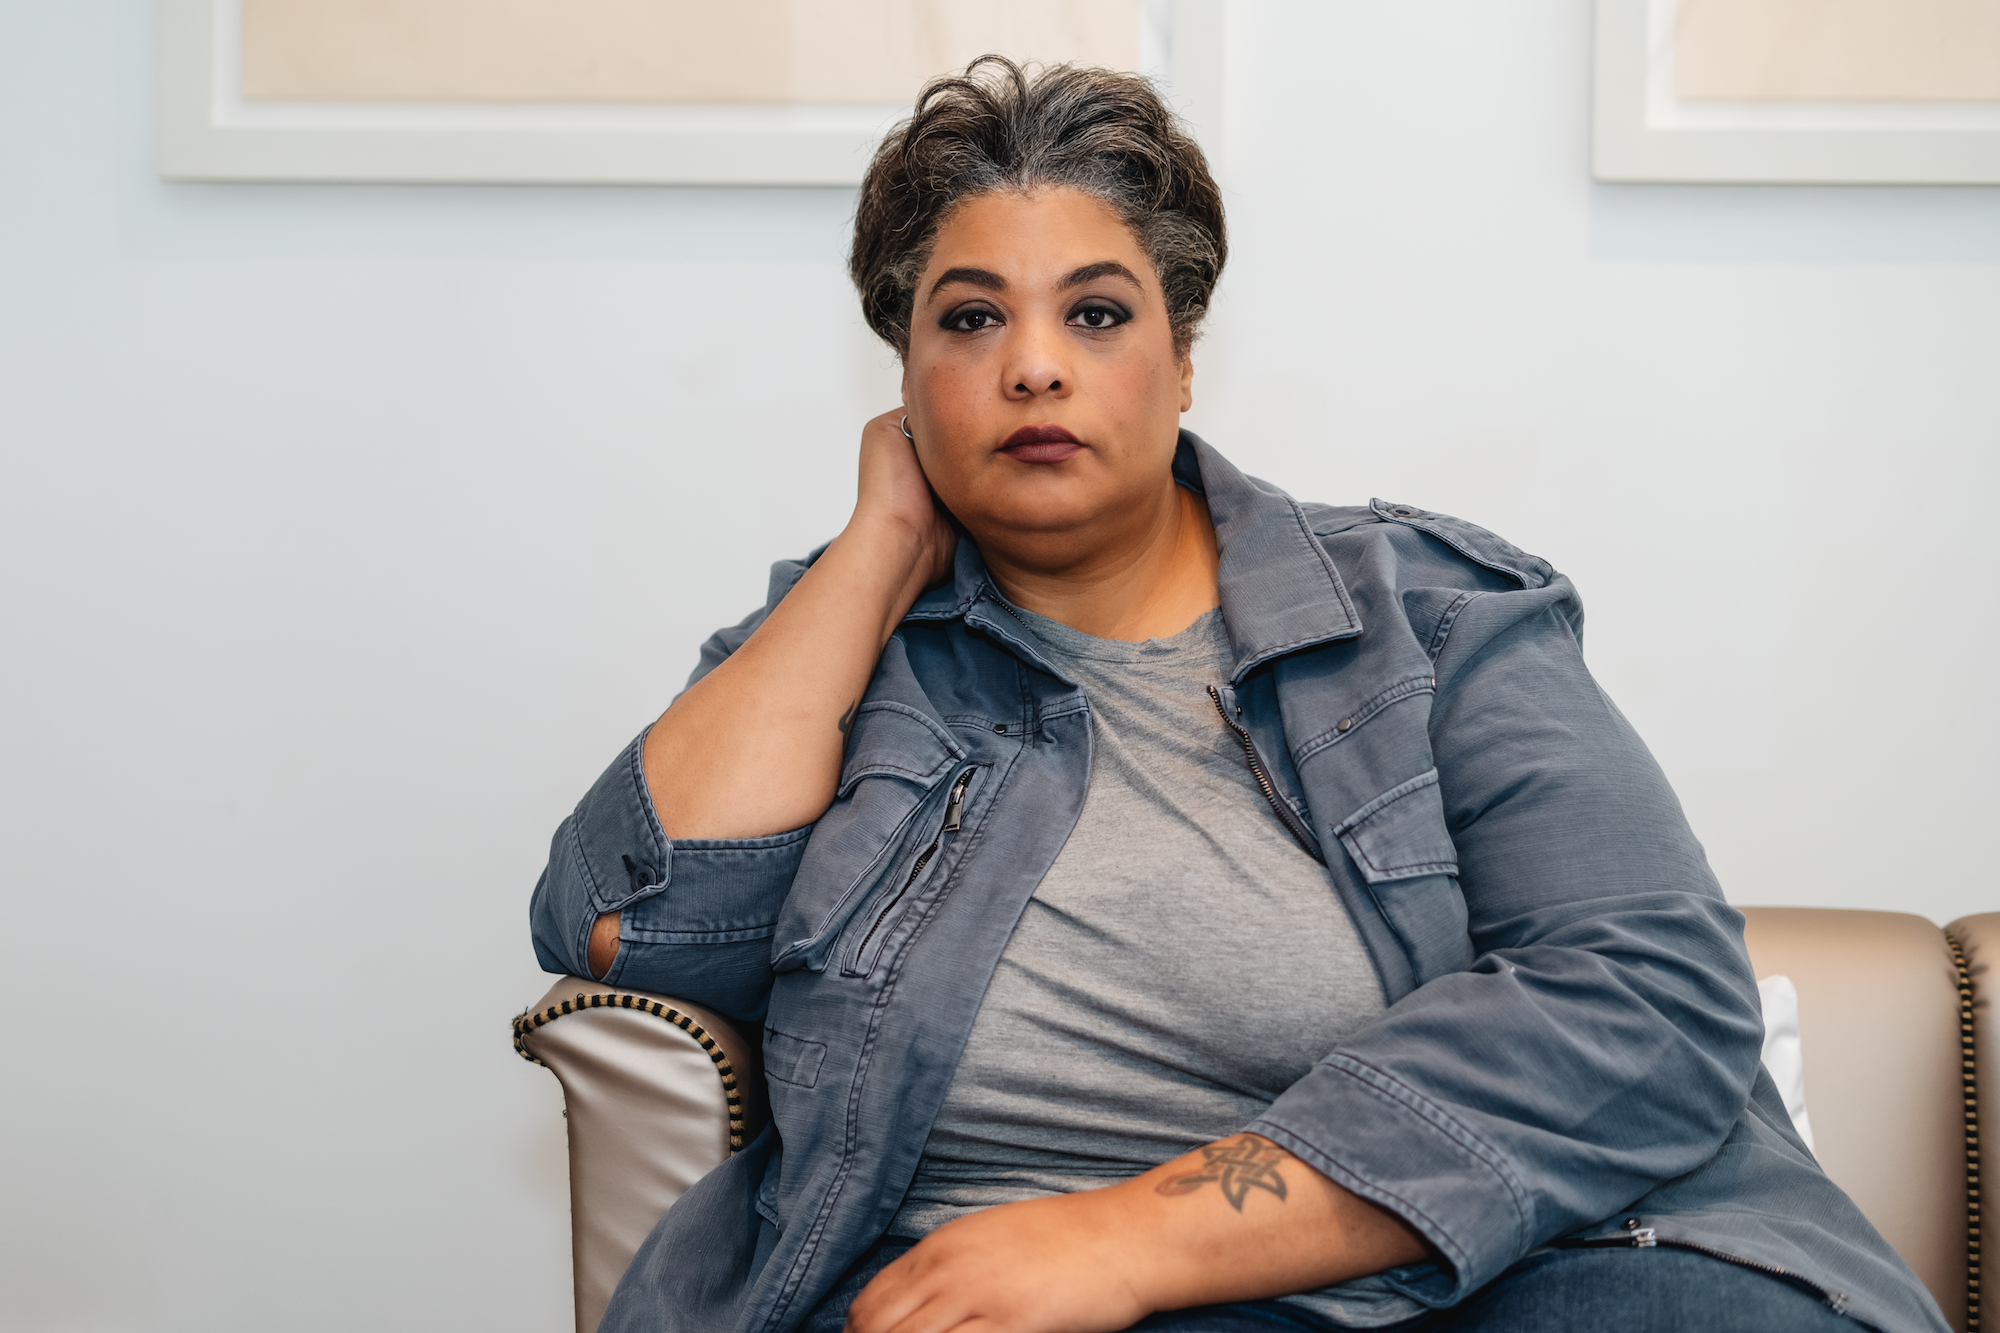 not that bad roxane gay nytimes